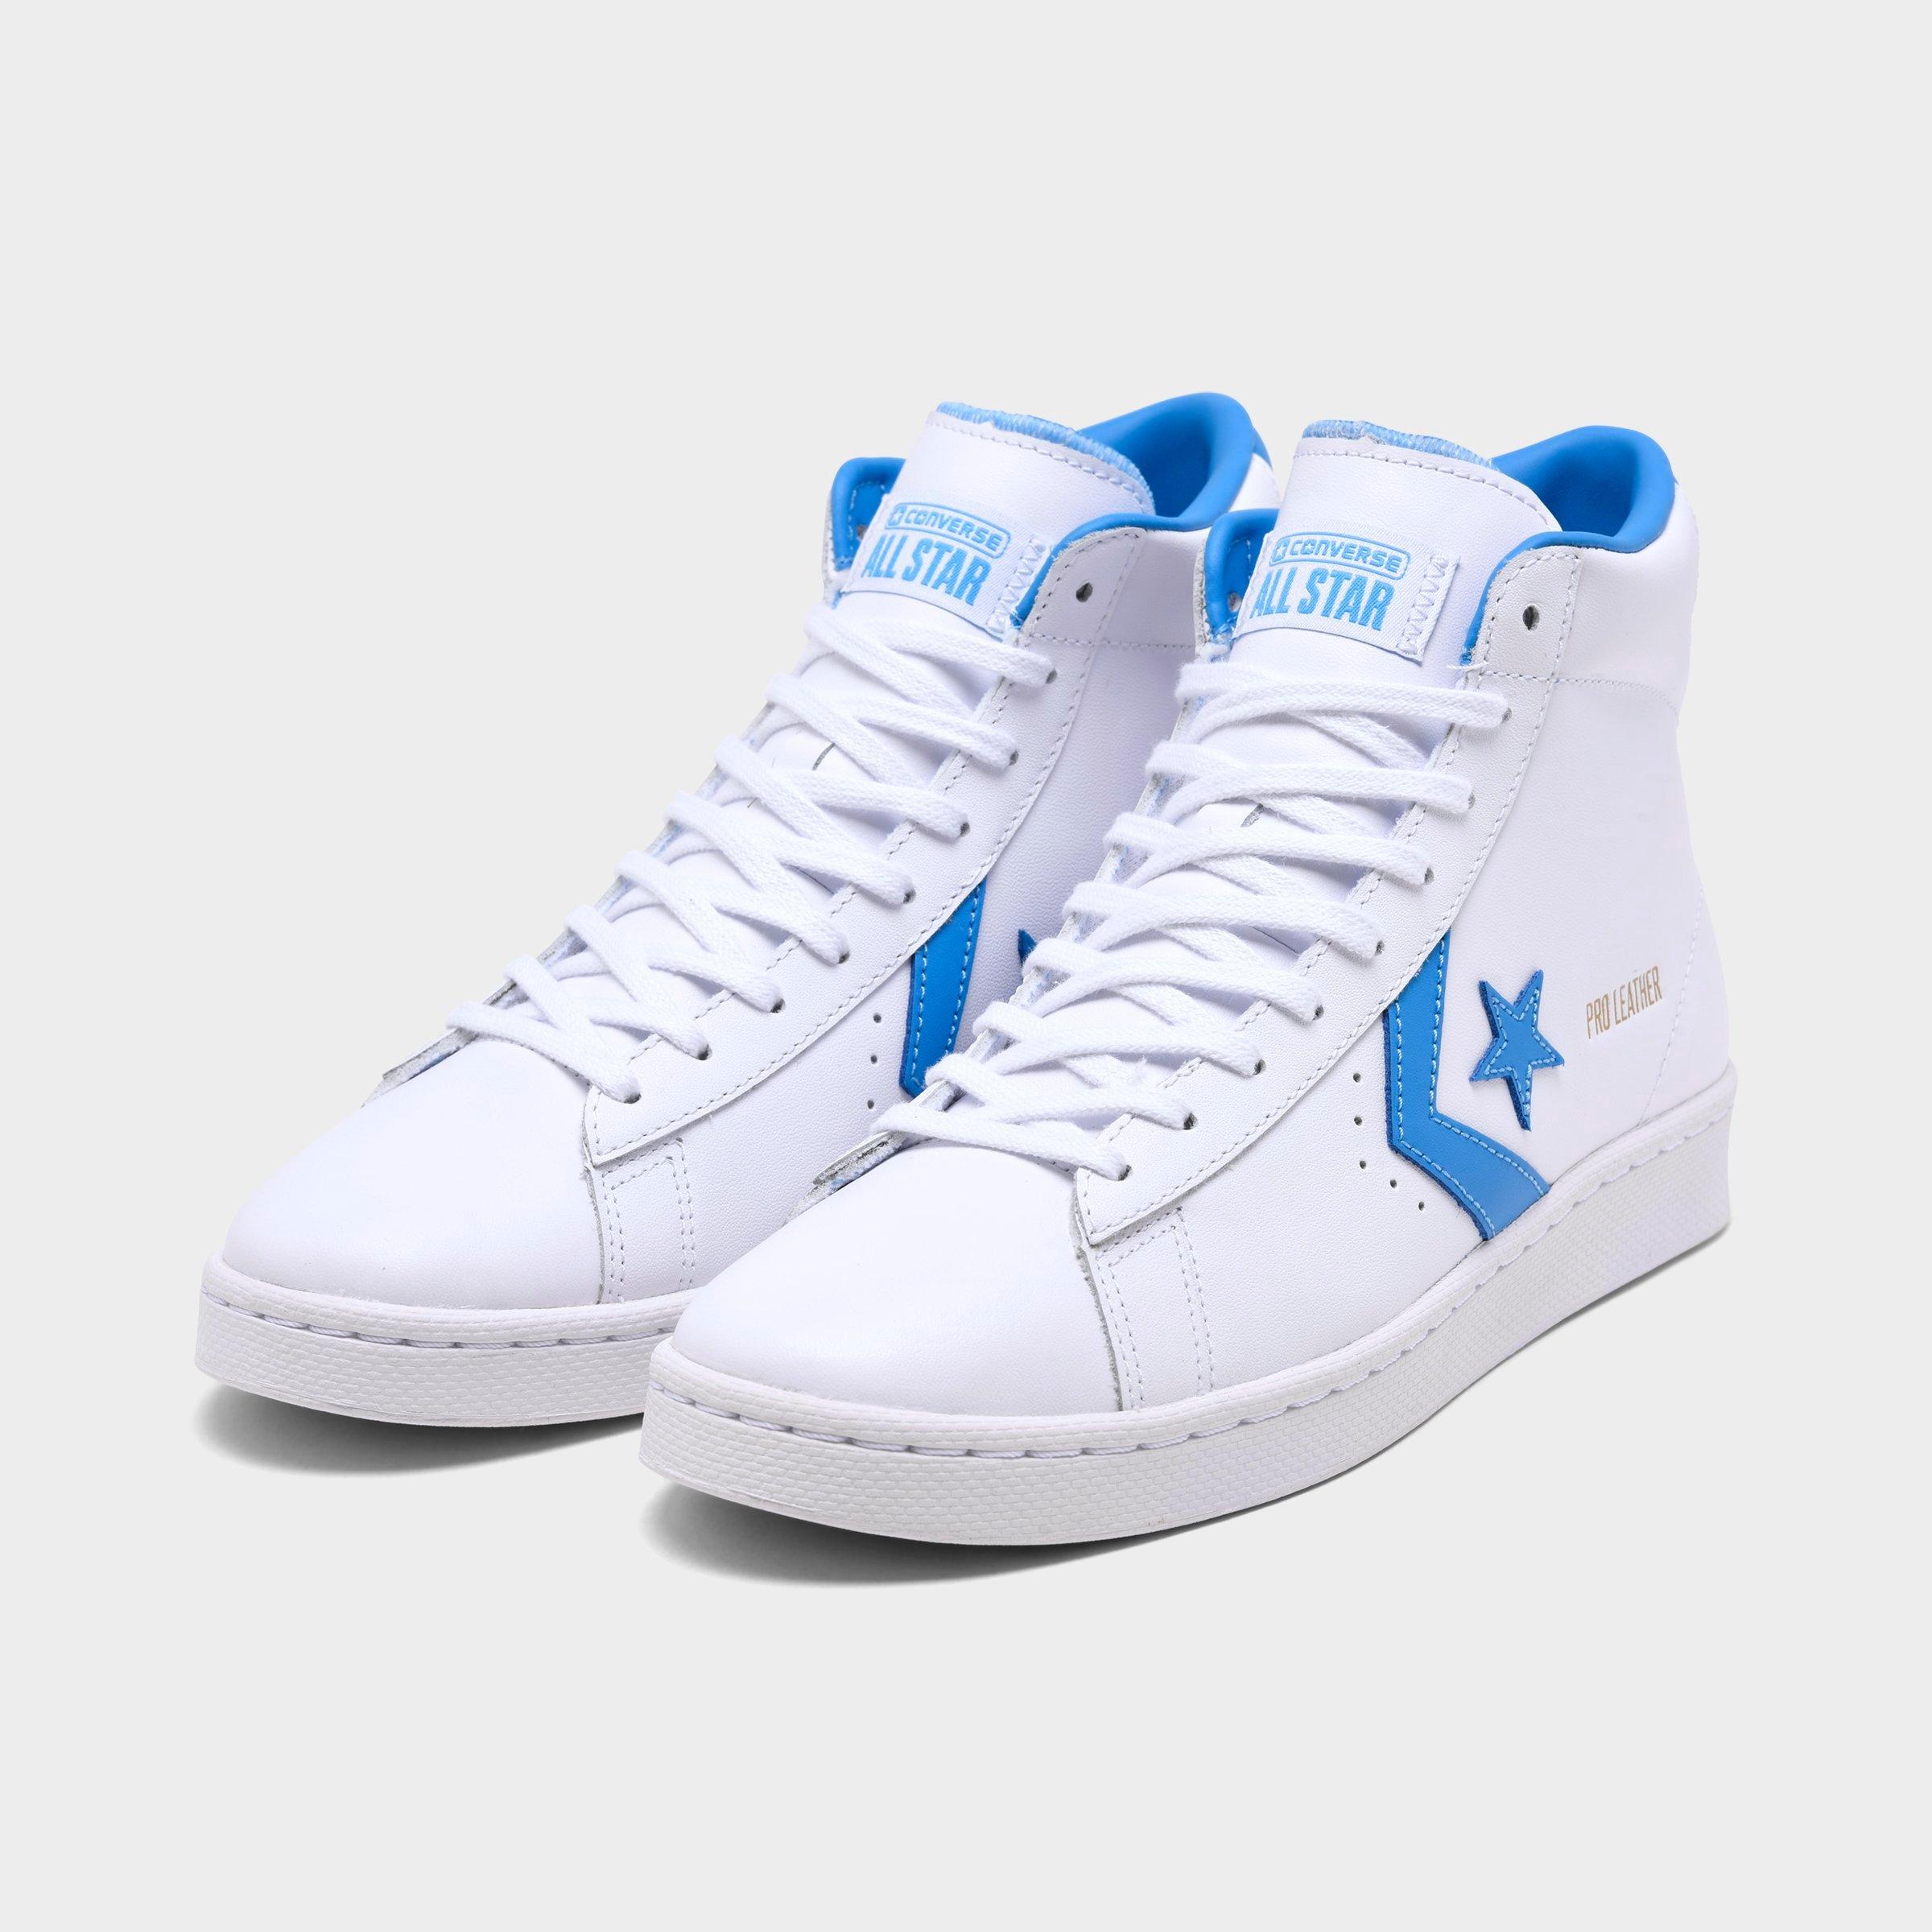 converse pro leather high